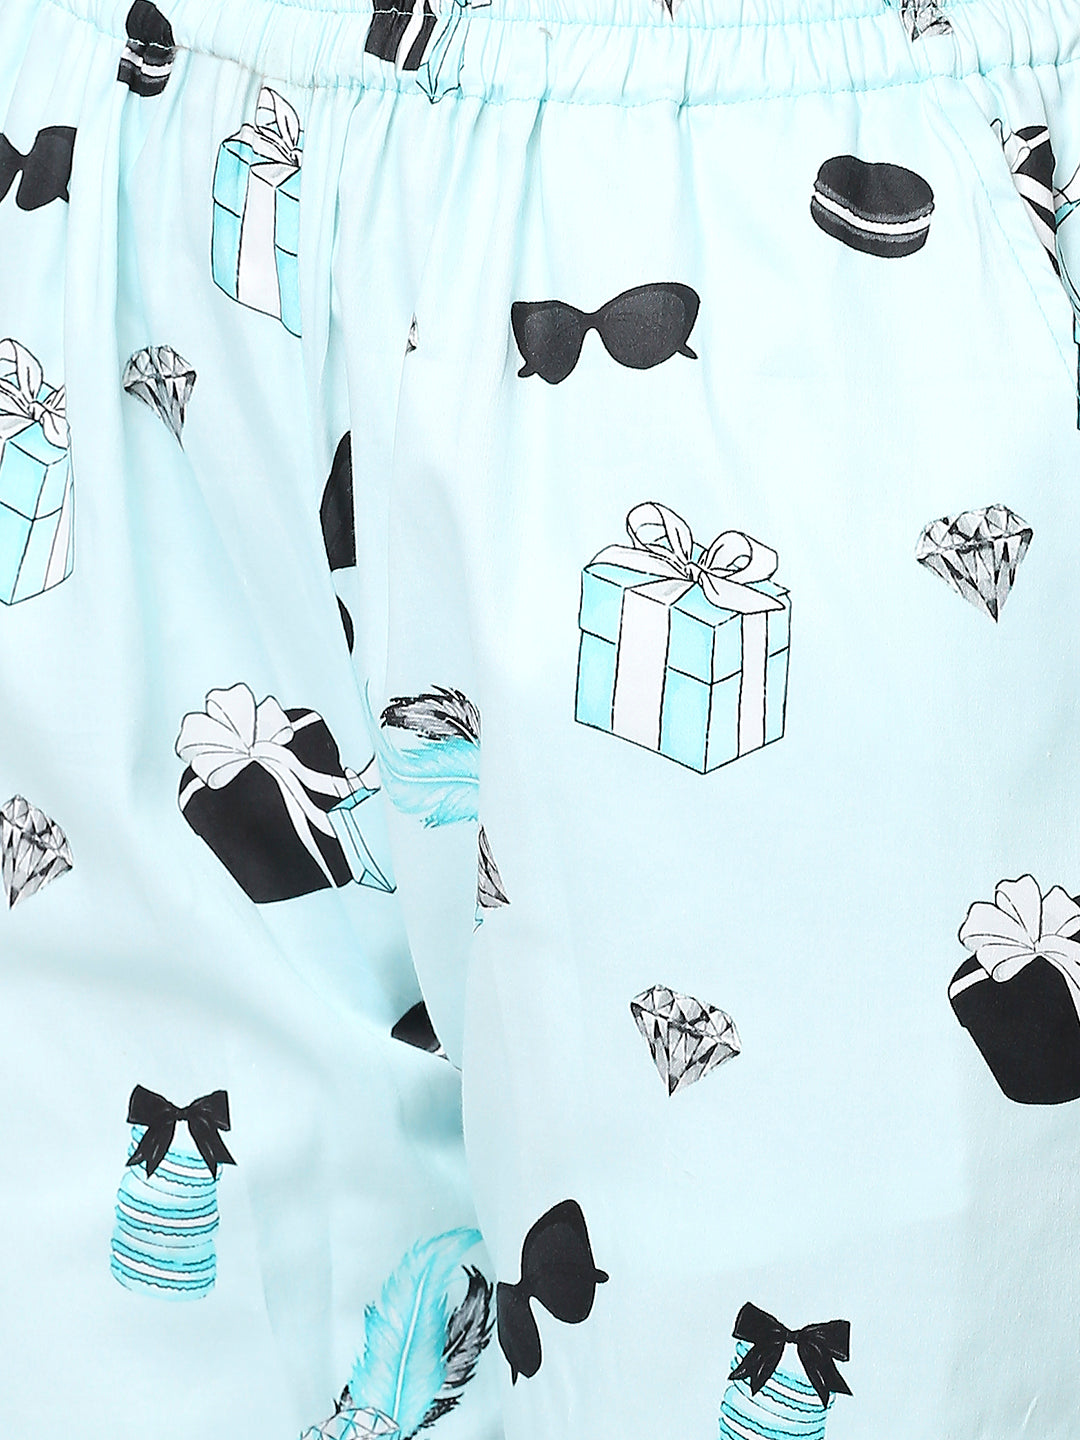 Breakfast at Tiffanys Button Down Pj Set - Pure Cotton Pj Set with Notched Collar